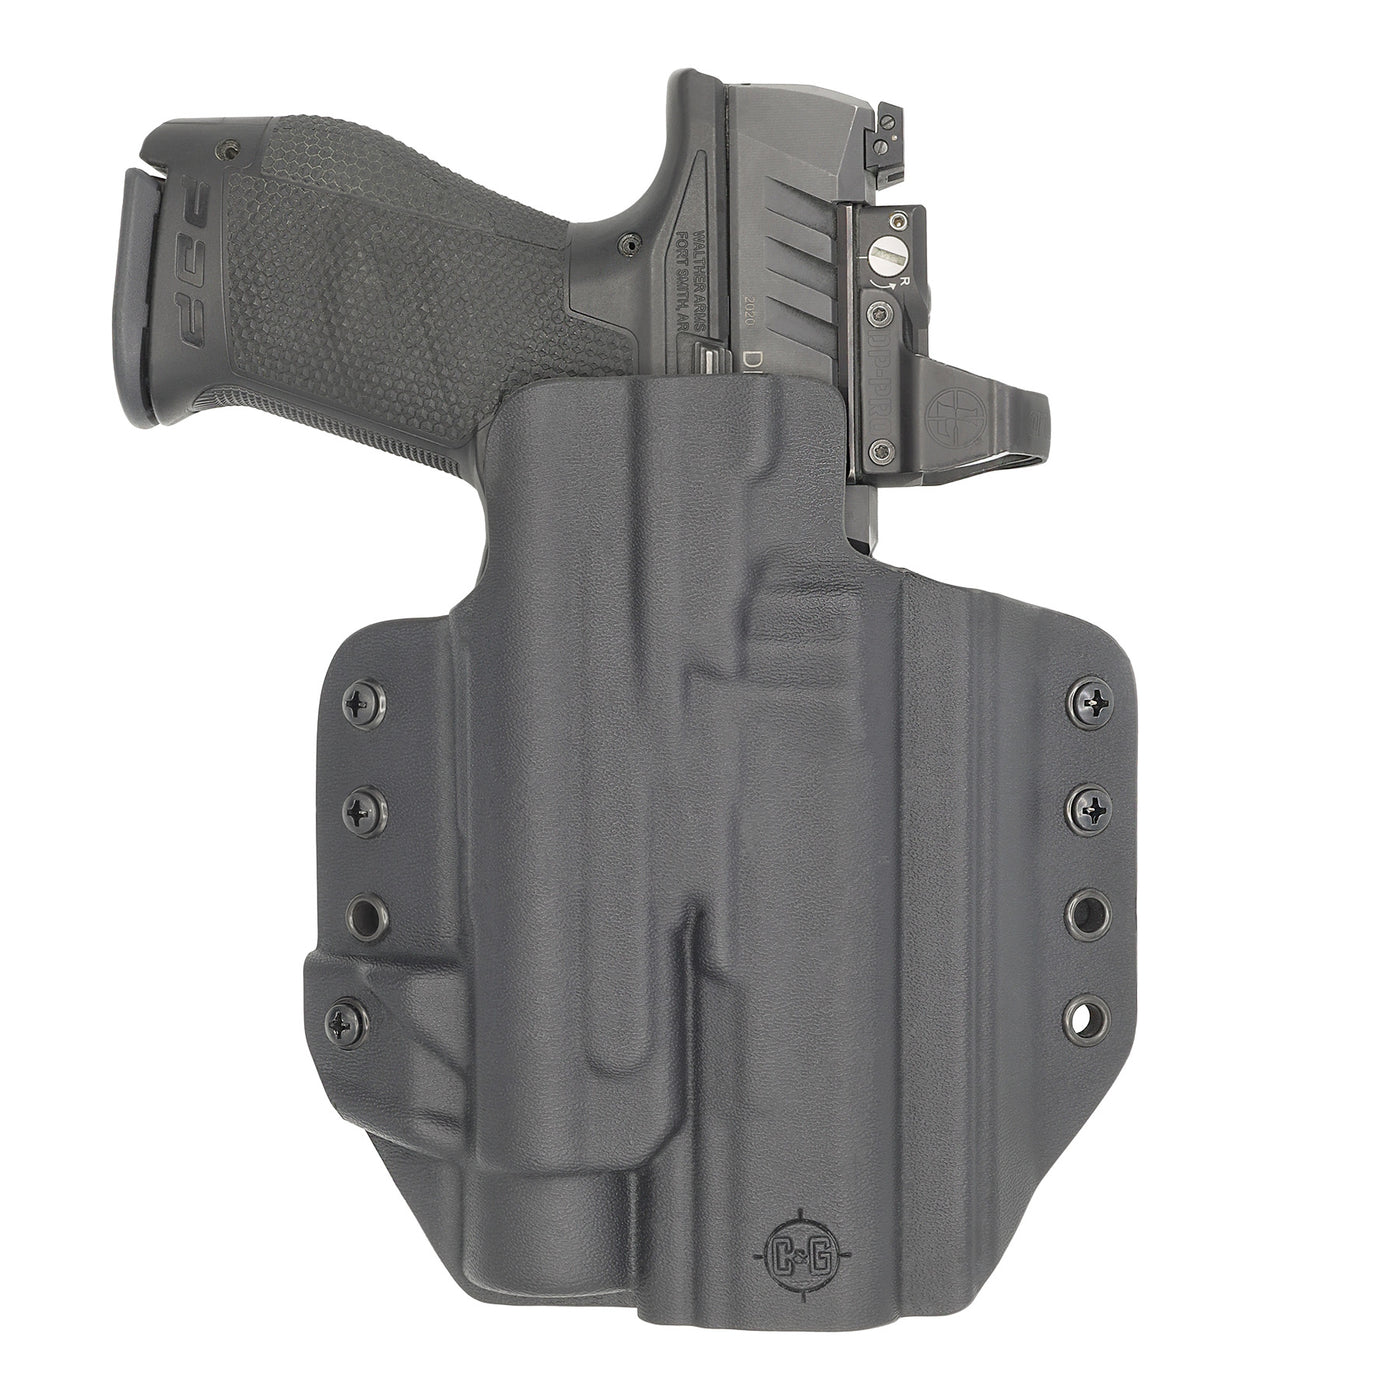 C&G Holsters custom OWB Tactical S&W M&P 9/40 Streamlight TLR1 in holstered position